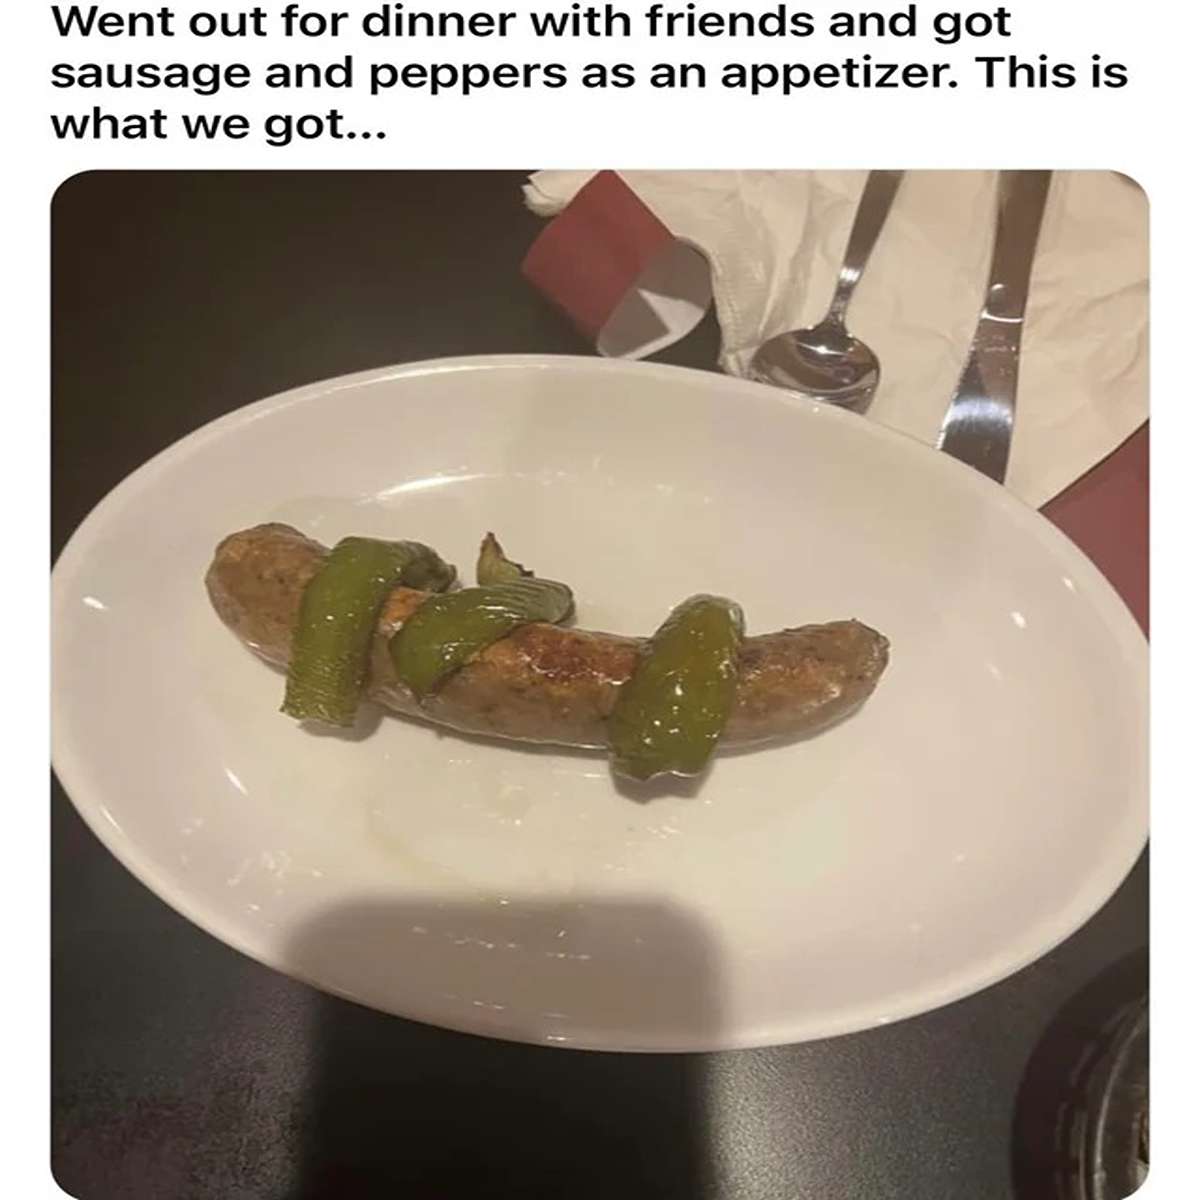 dank memes - dish - Went out for dinner with friends and got sausage and peppers as an appetizer. This is what we got...